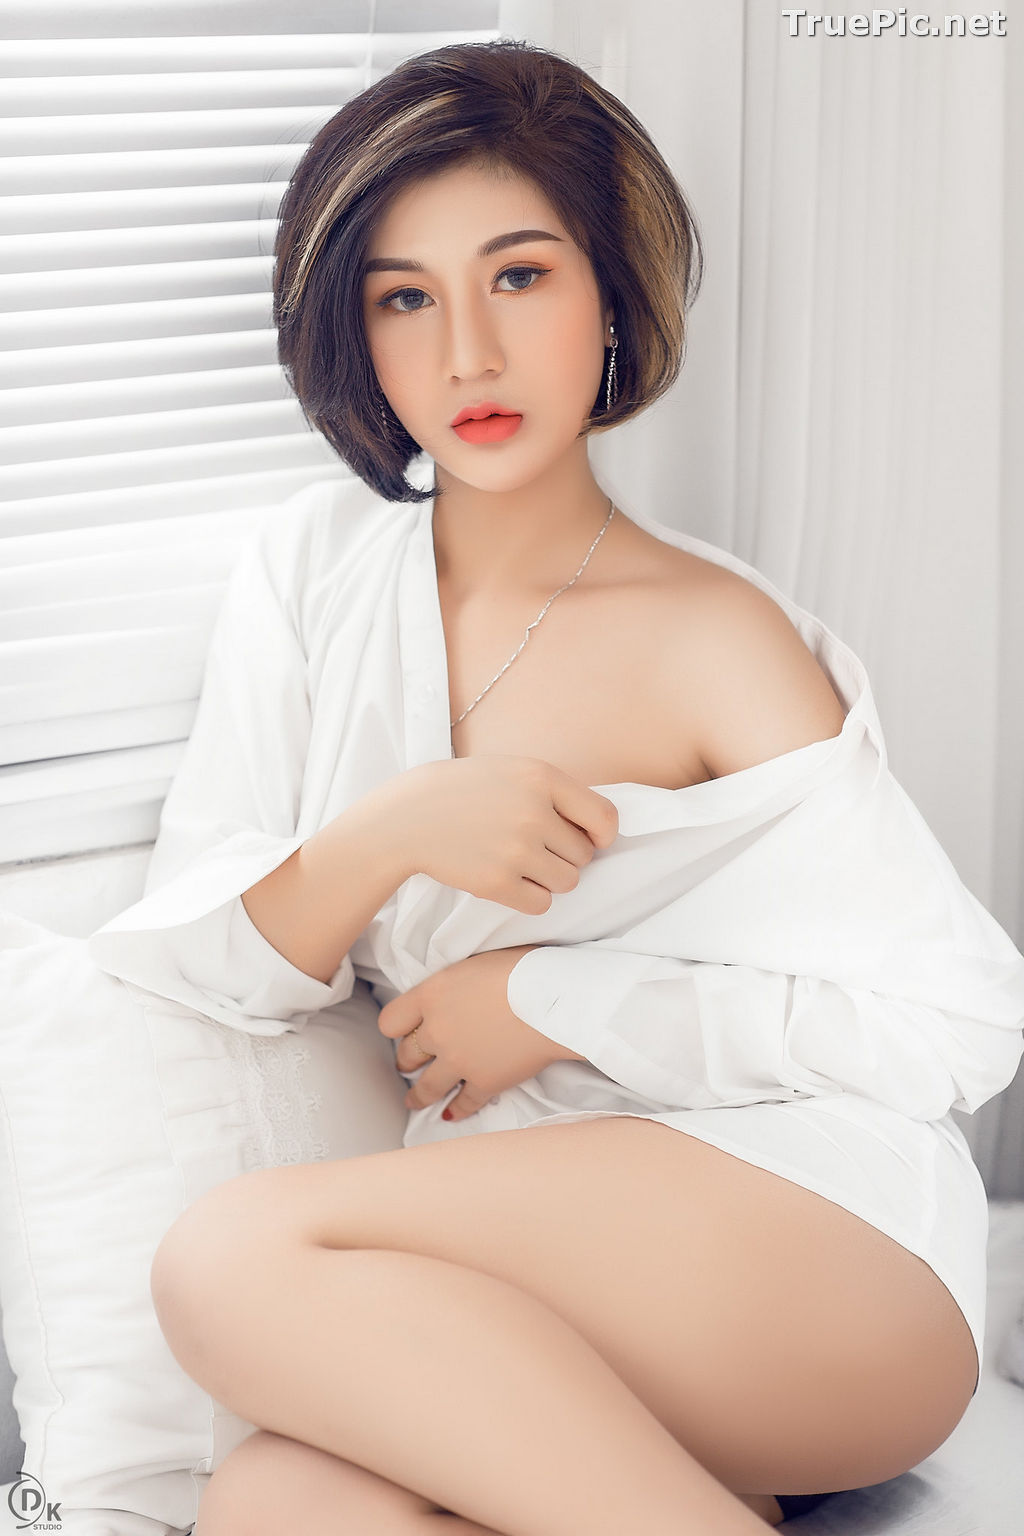 Image The Beauty of Vietnamese Girls – Photo Collection 2020 (#20) - TruePic.net - Picture-77